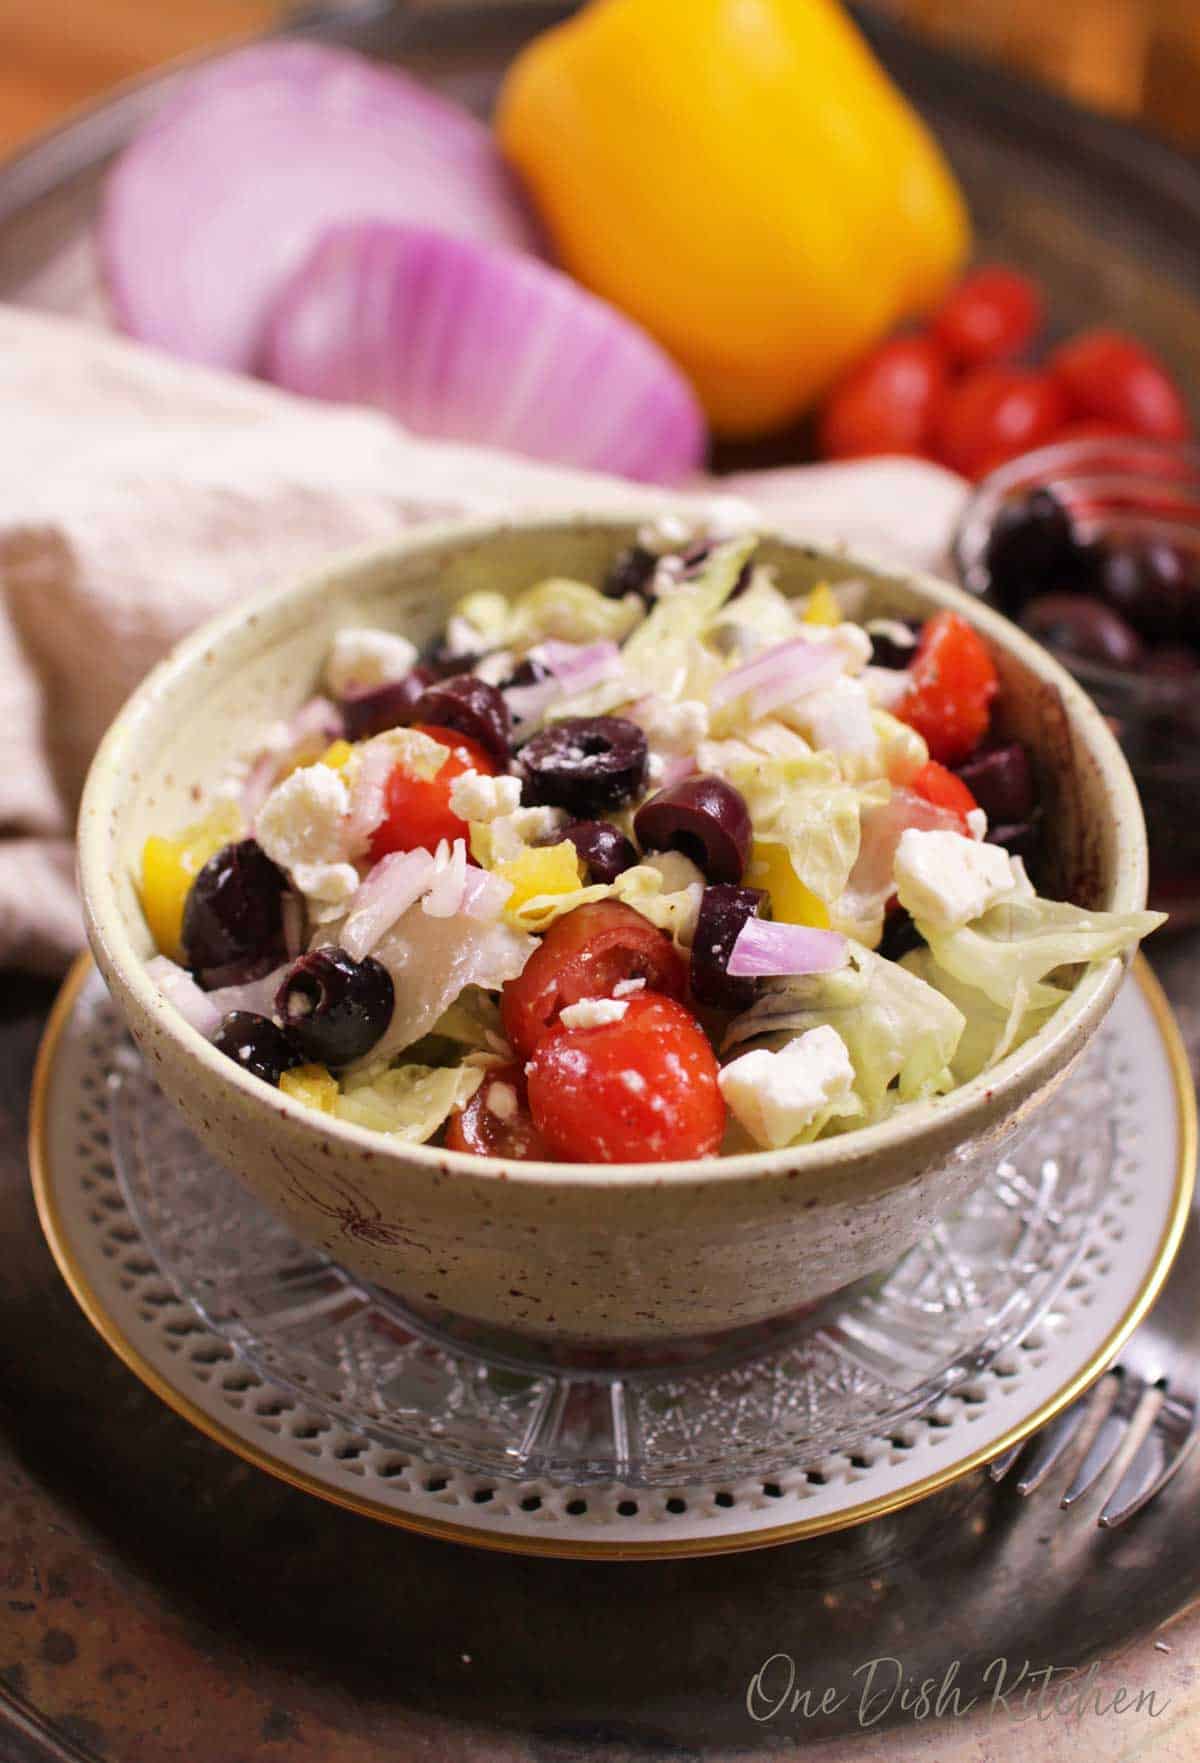 A Greek salad with olives, feta, tomatoes in a bowl with whole vegetables in the background.